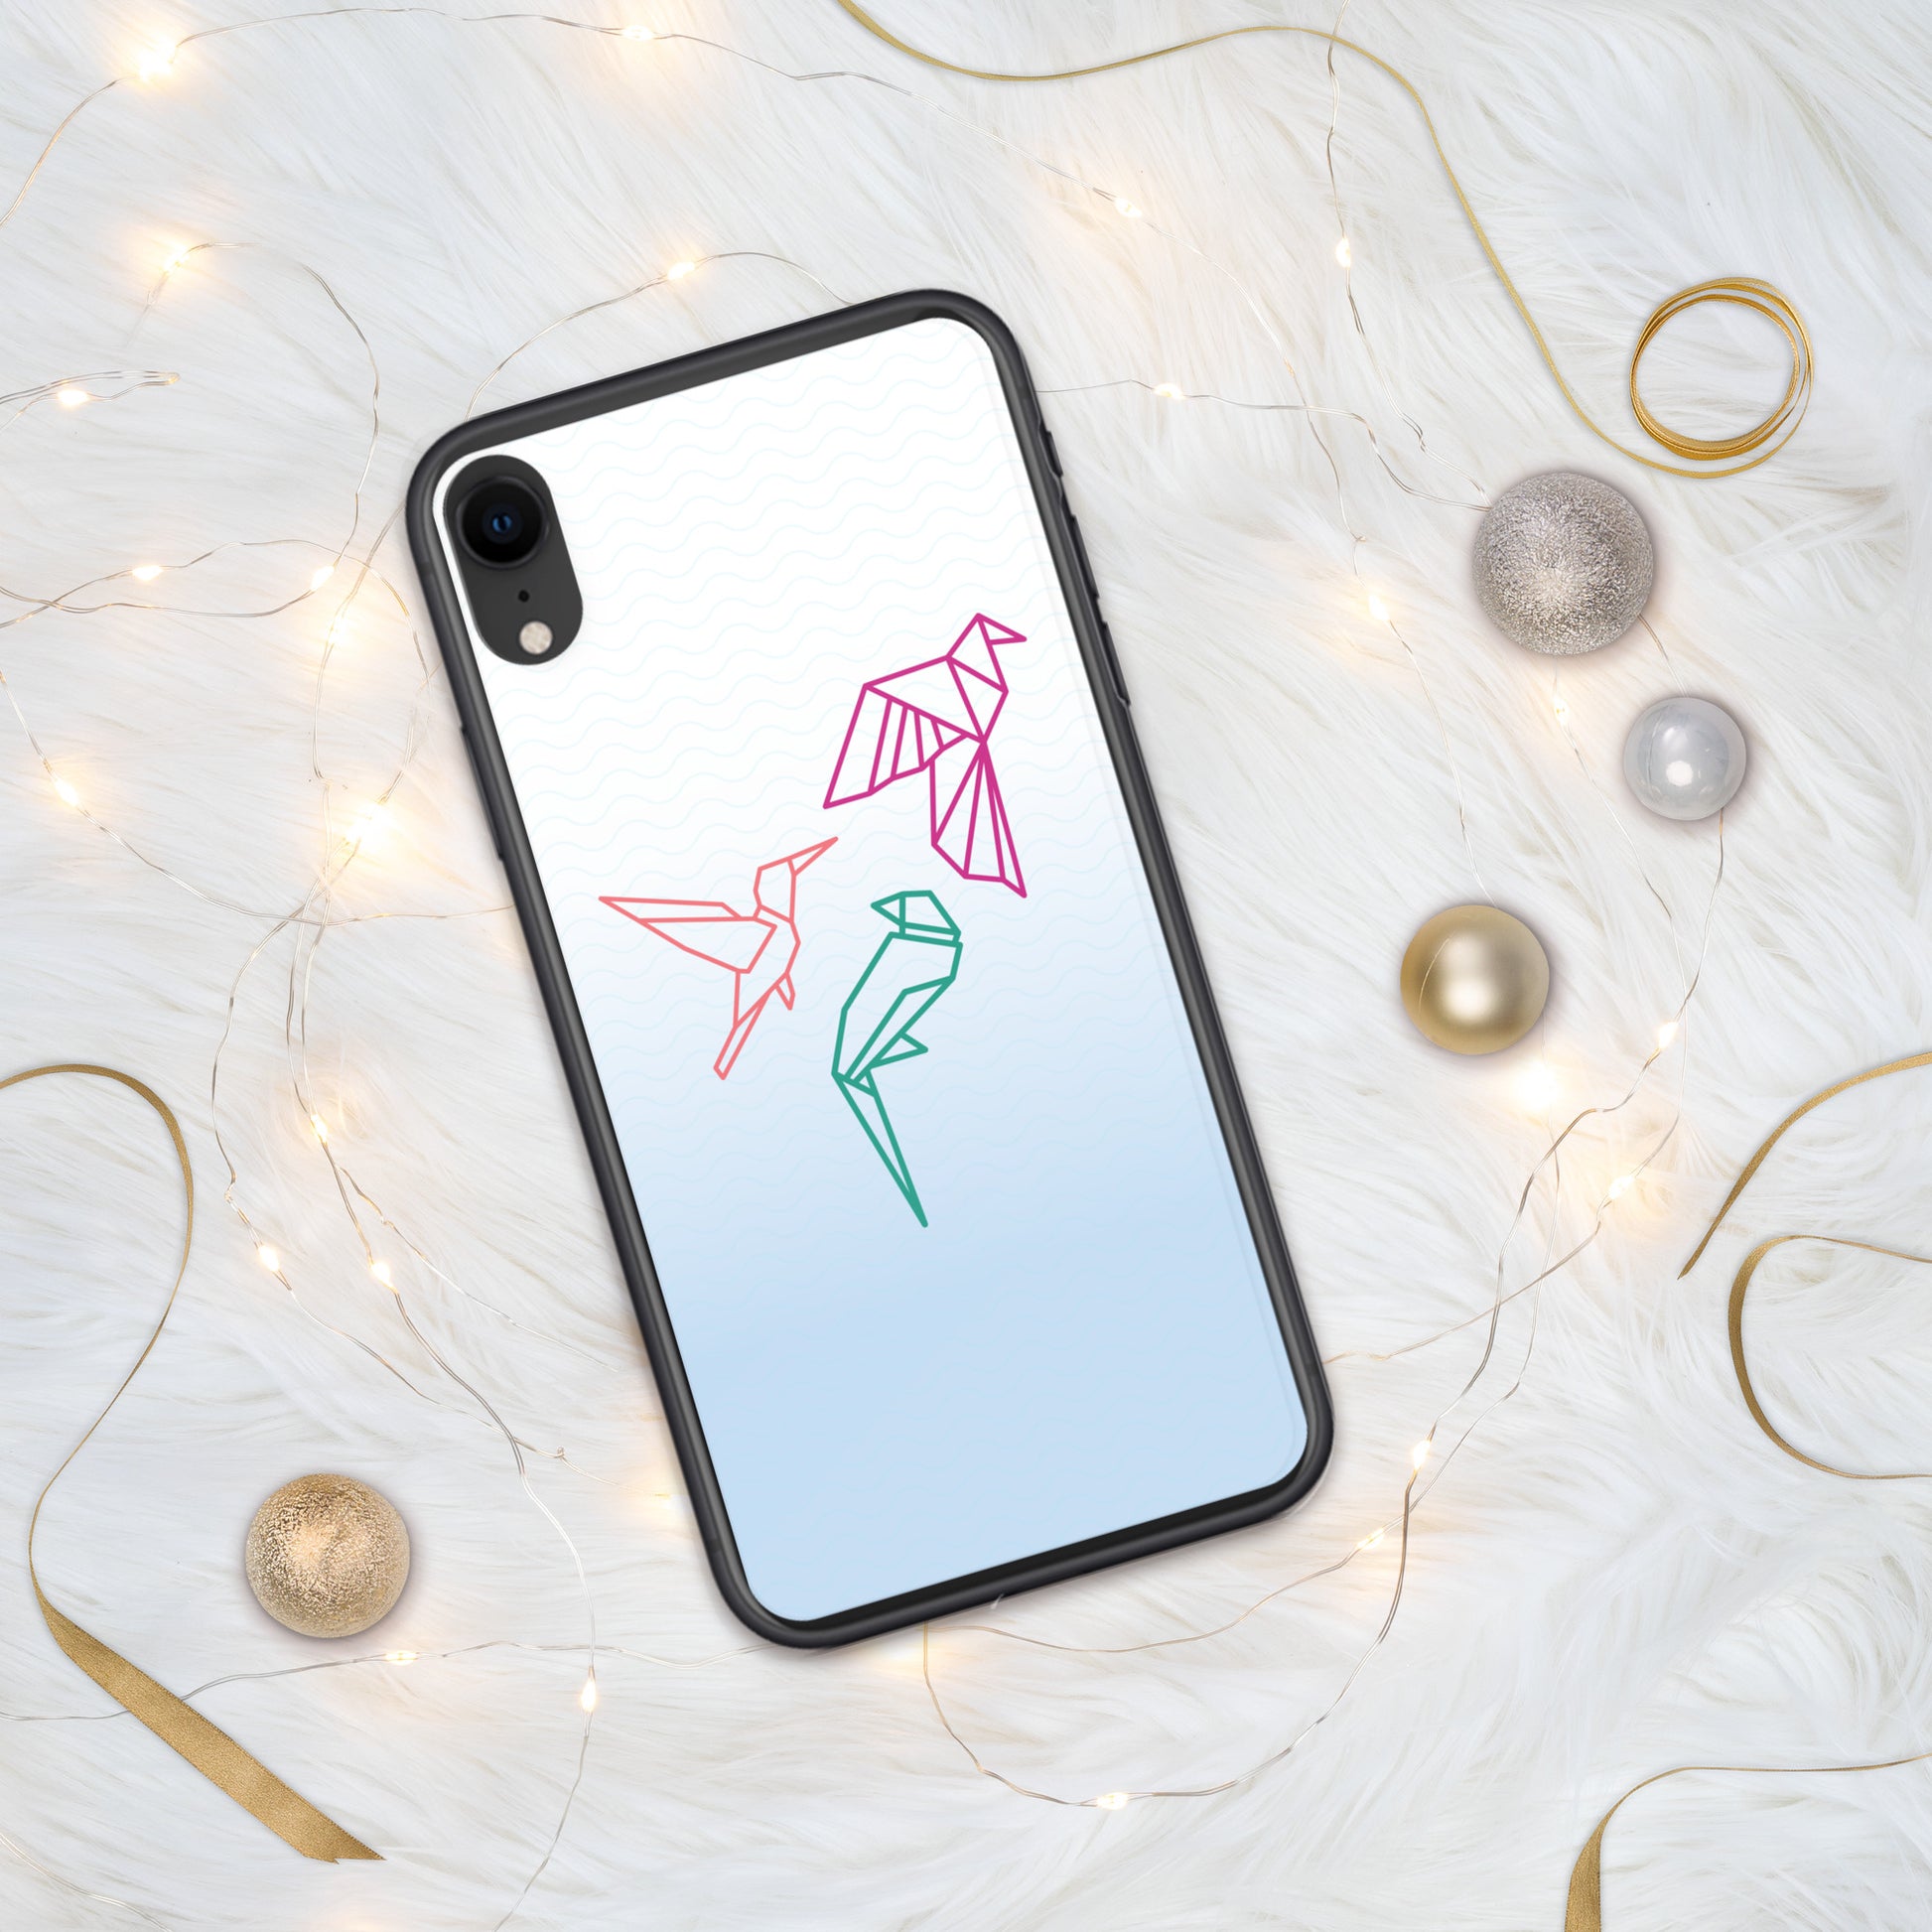 Clear case for Iphone with a three birds in orange, green and pink